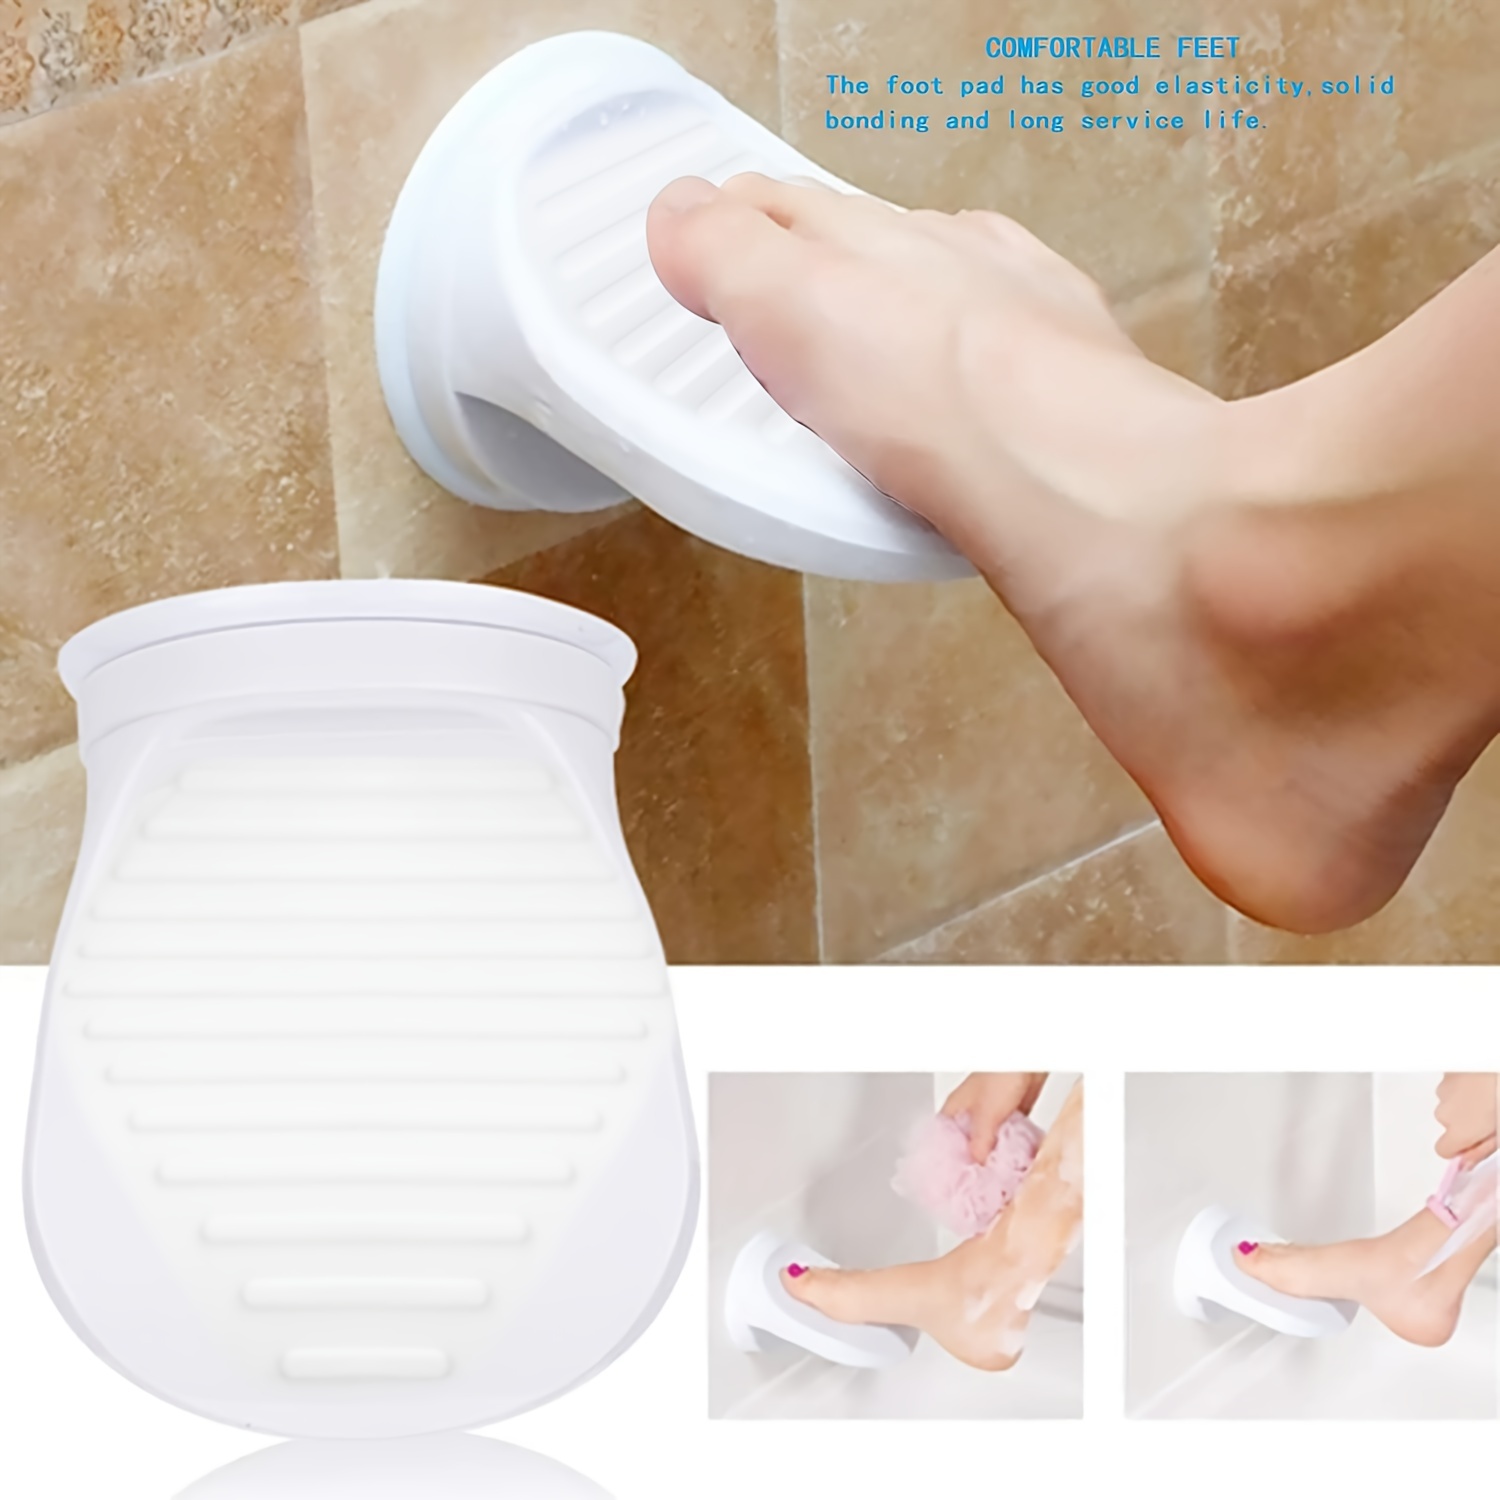 

Ergonomic Shower Foot Rest With Suction Cup - Non-slip, Easy Install Bathroom Step For Elderly & Leg Support